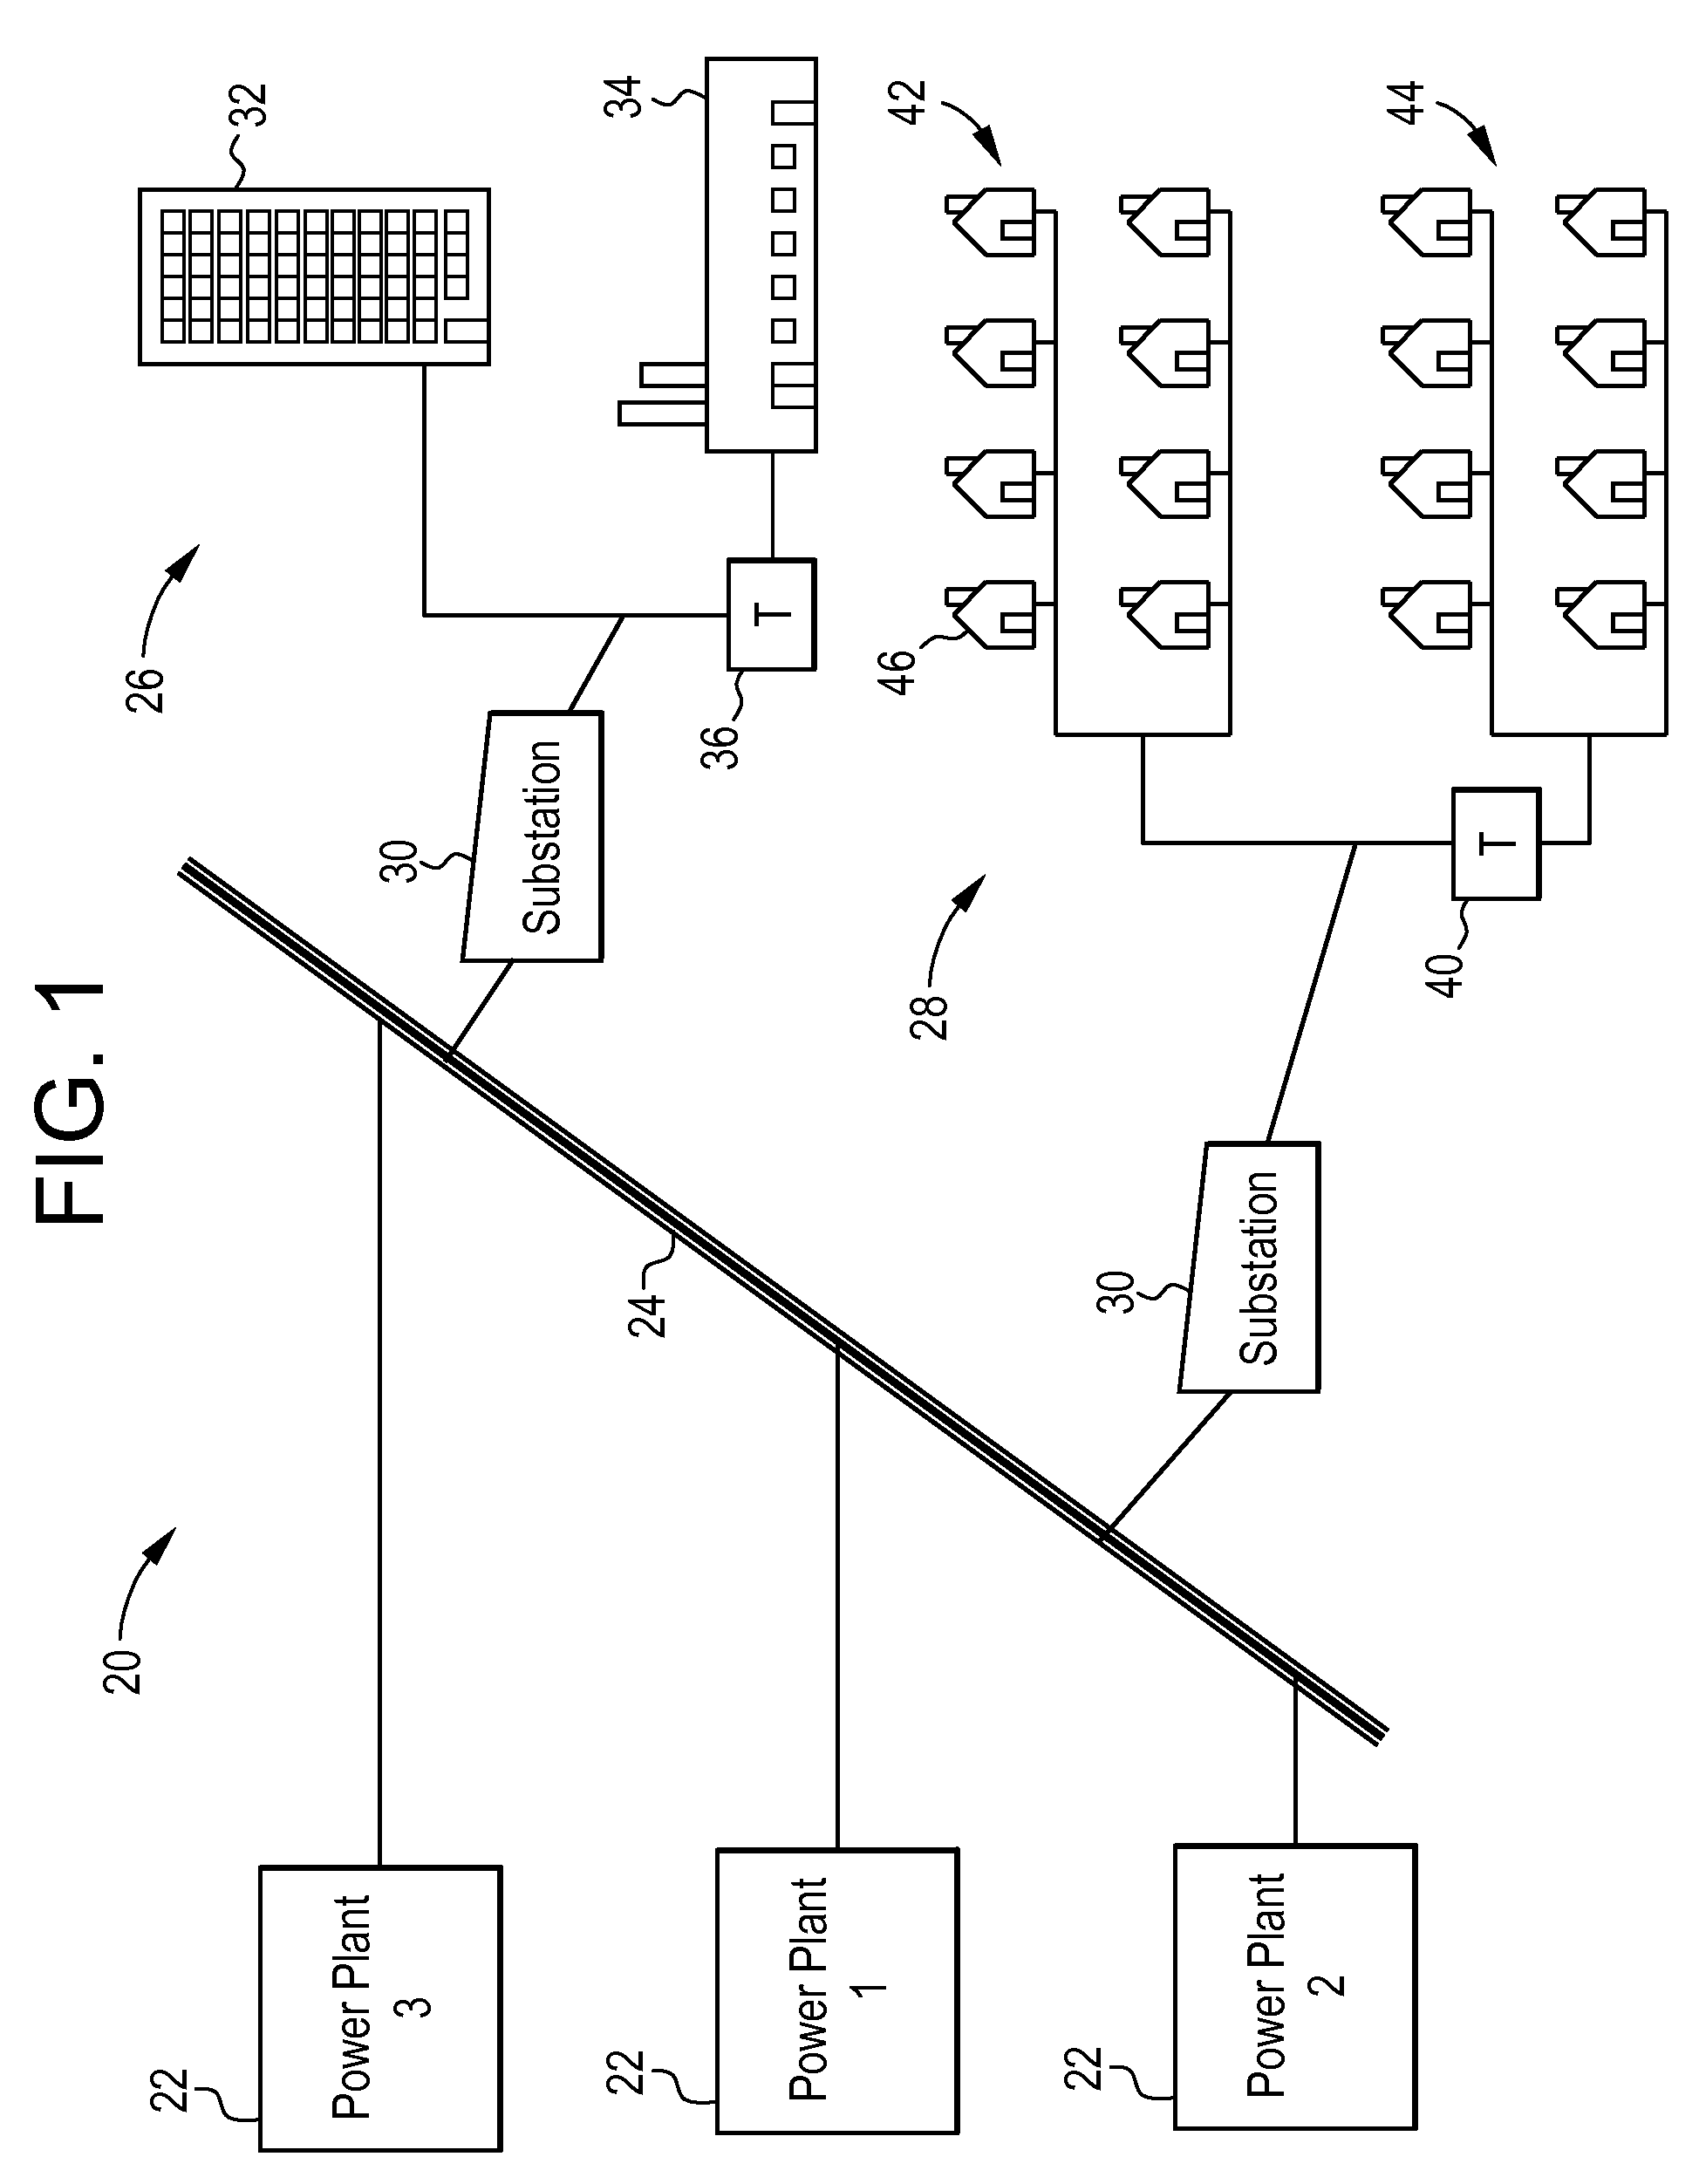 Hybrid vehicle recharging system and method of operation